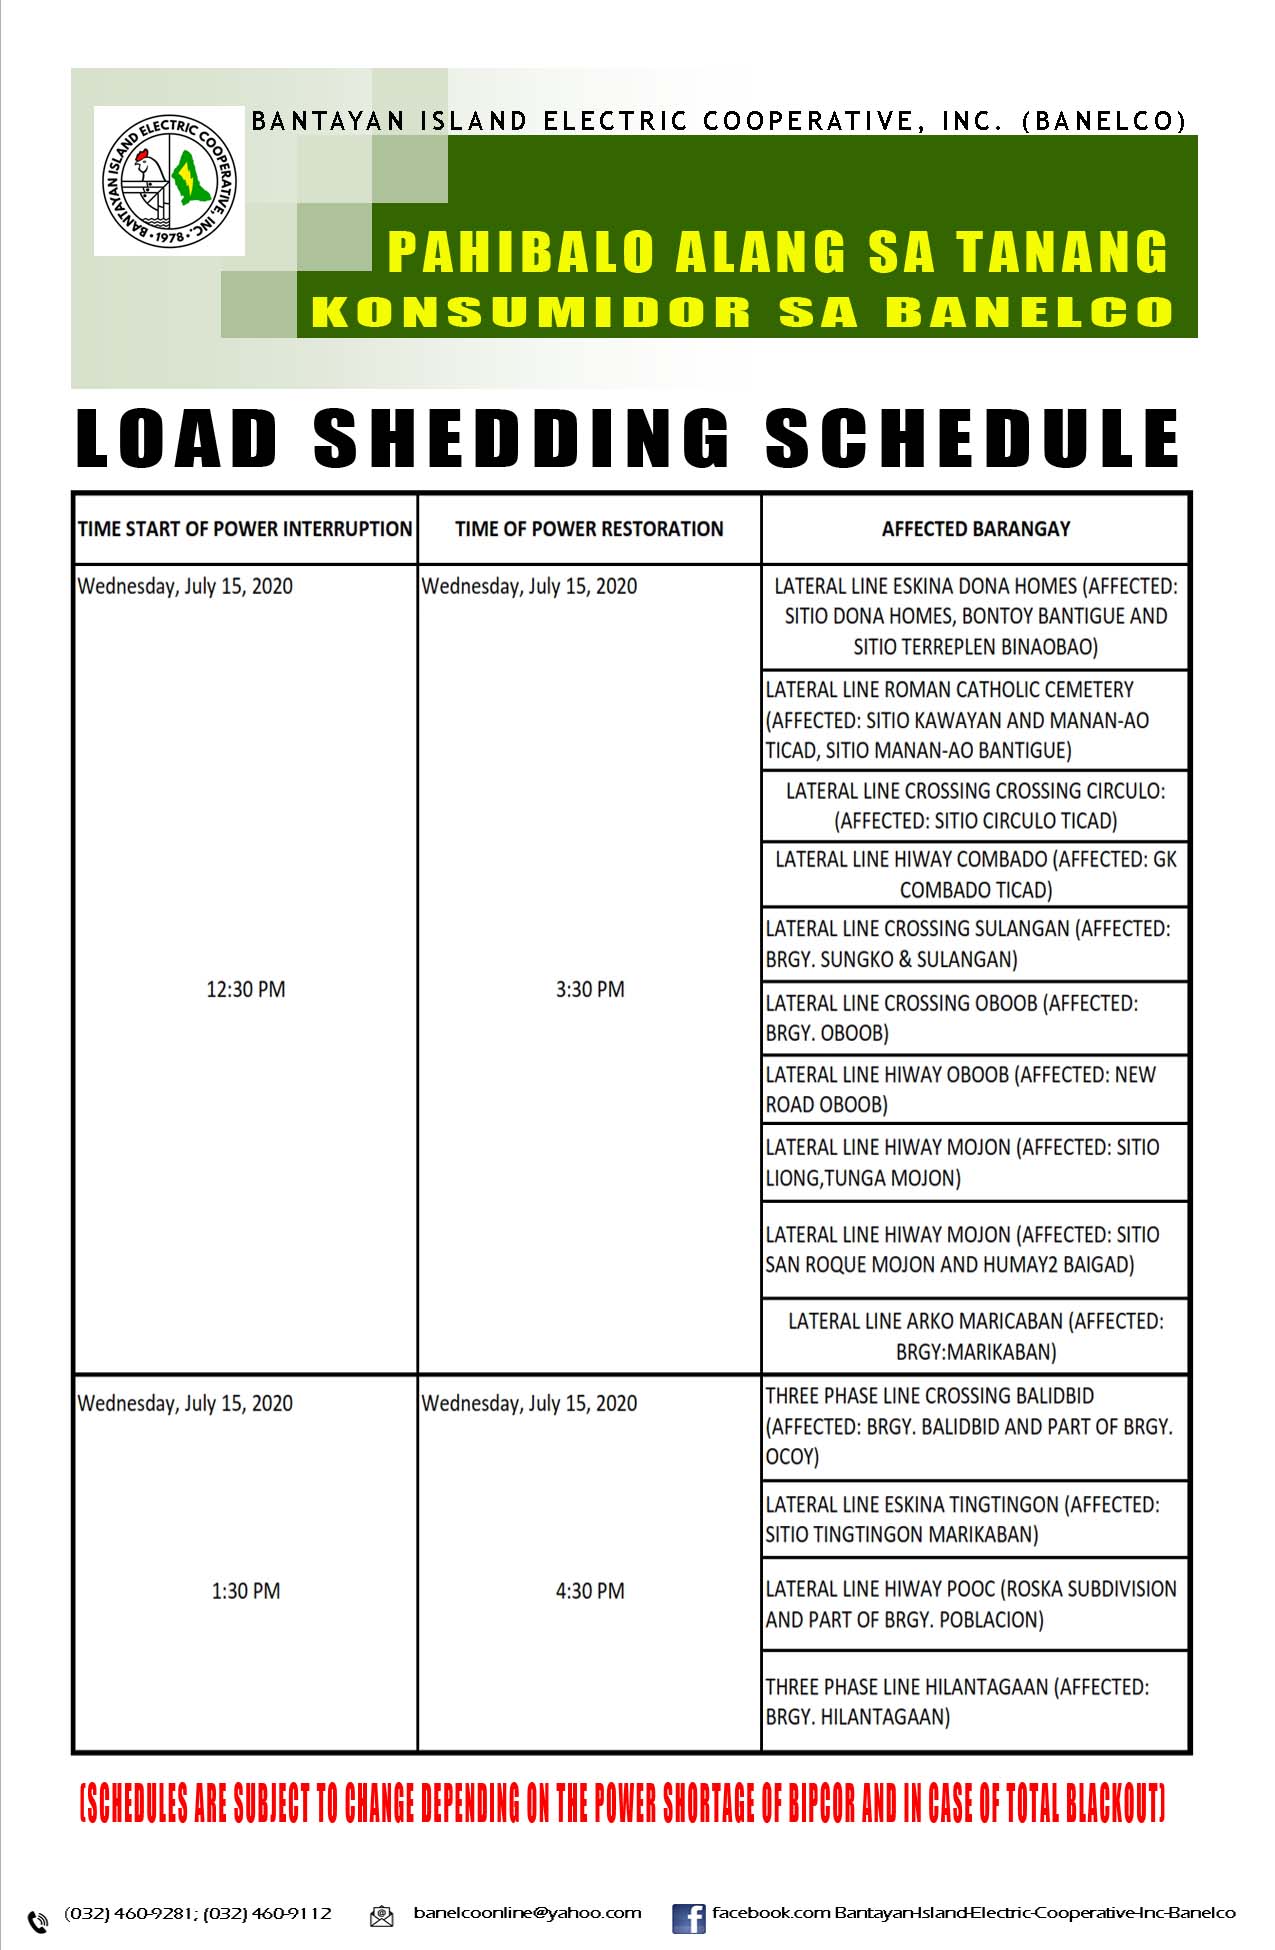 pahibalo-load-shedding-schedule-7-15-2020-PM